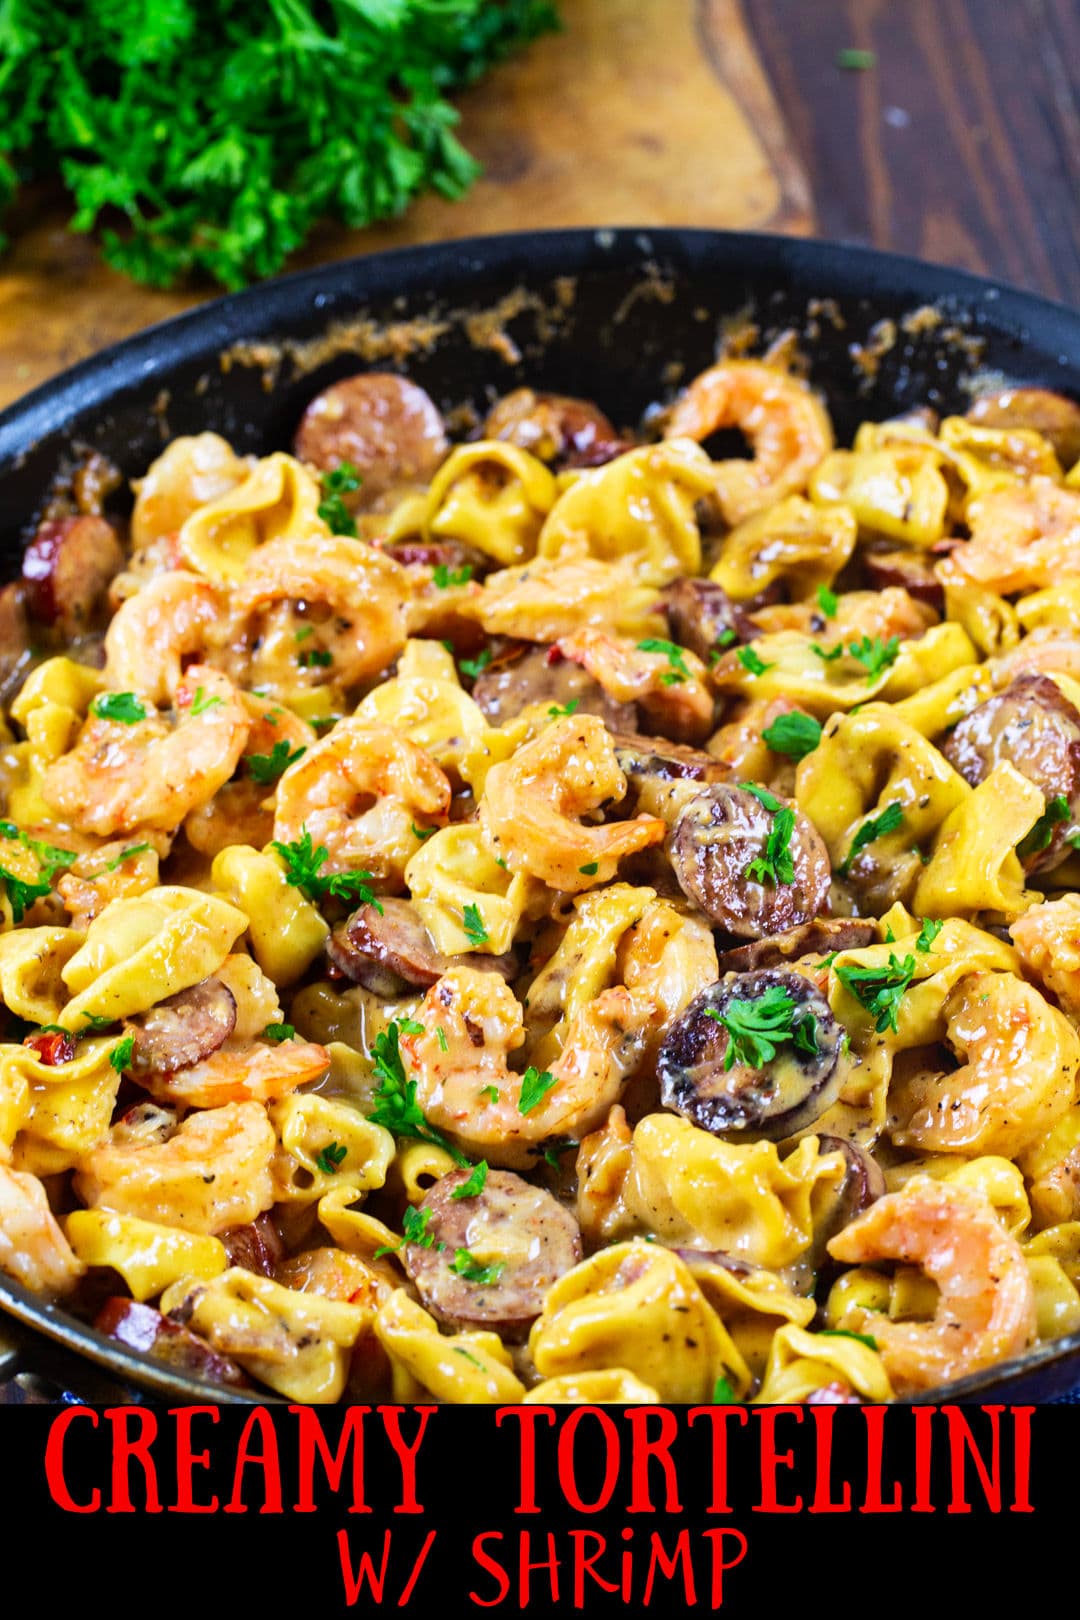 Cooked tortellini in a large skillet.